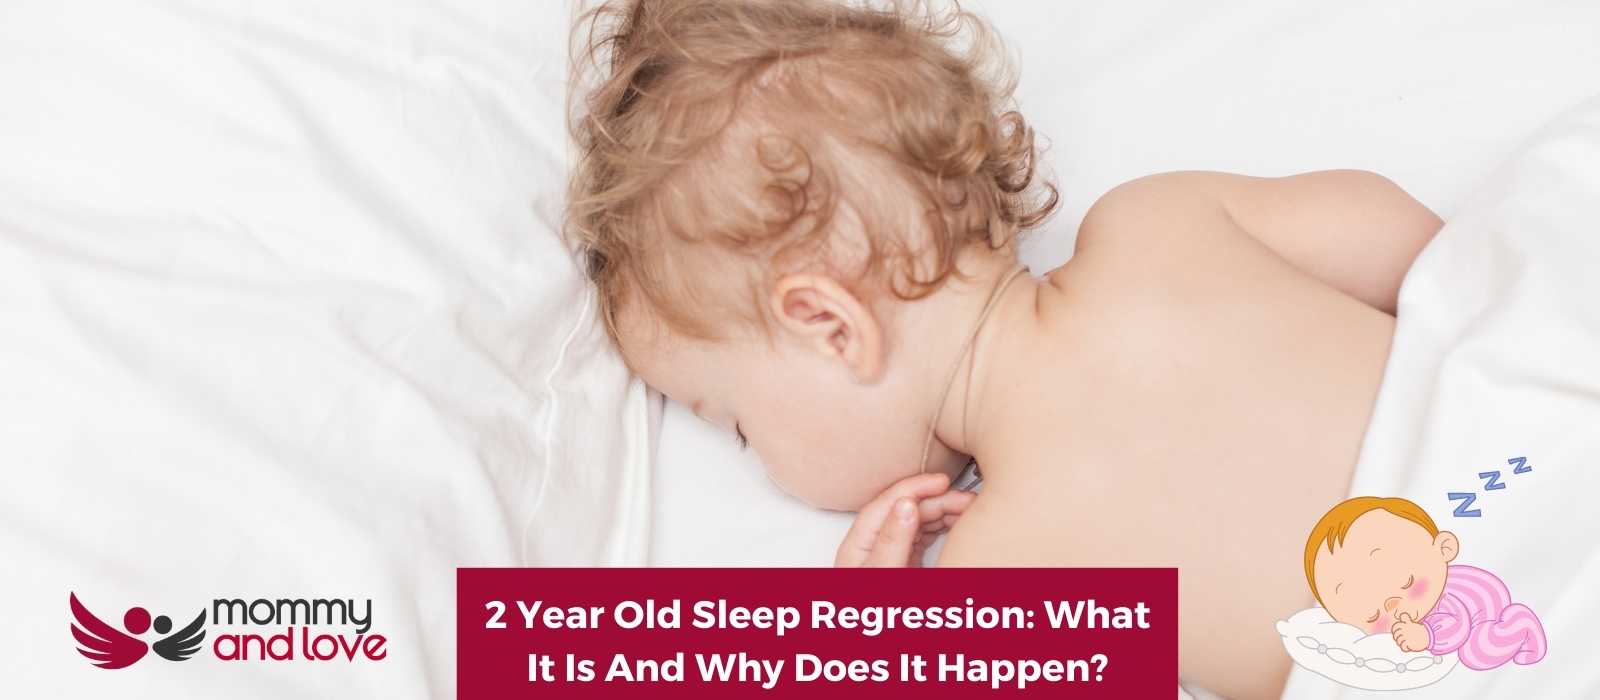 2 Year Old Sleep Regression What It Is And Why Does It Happen